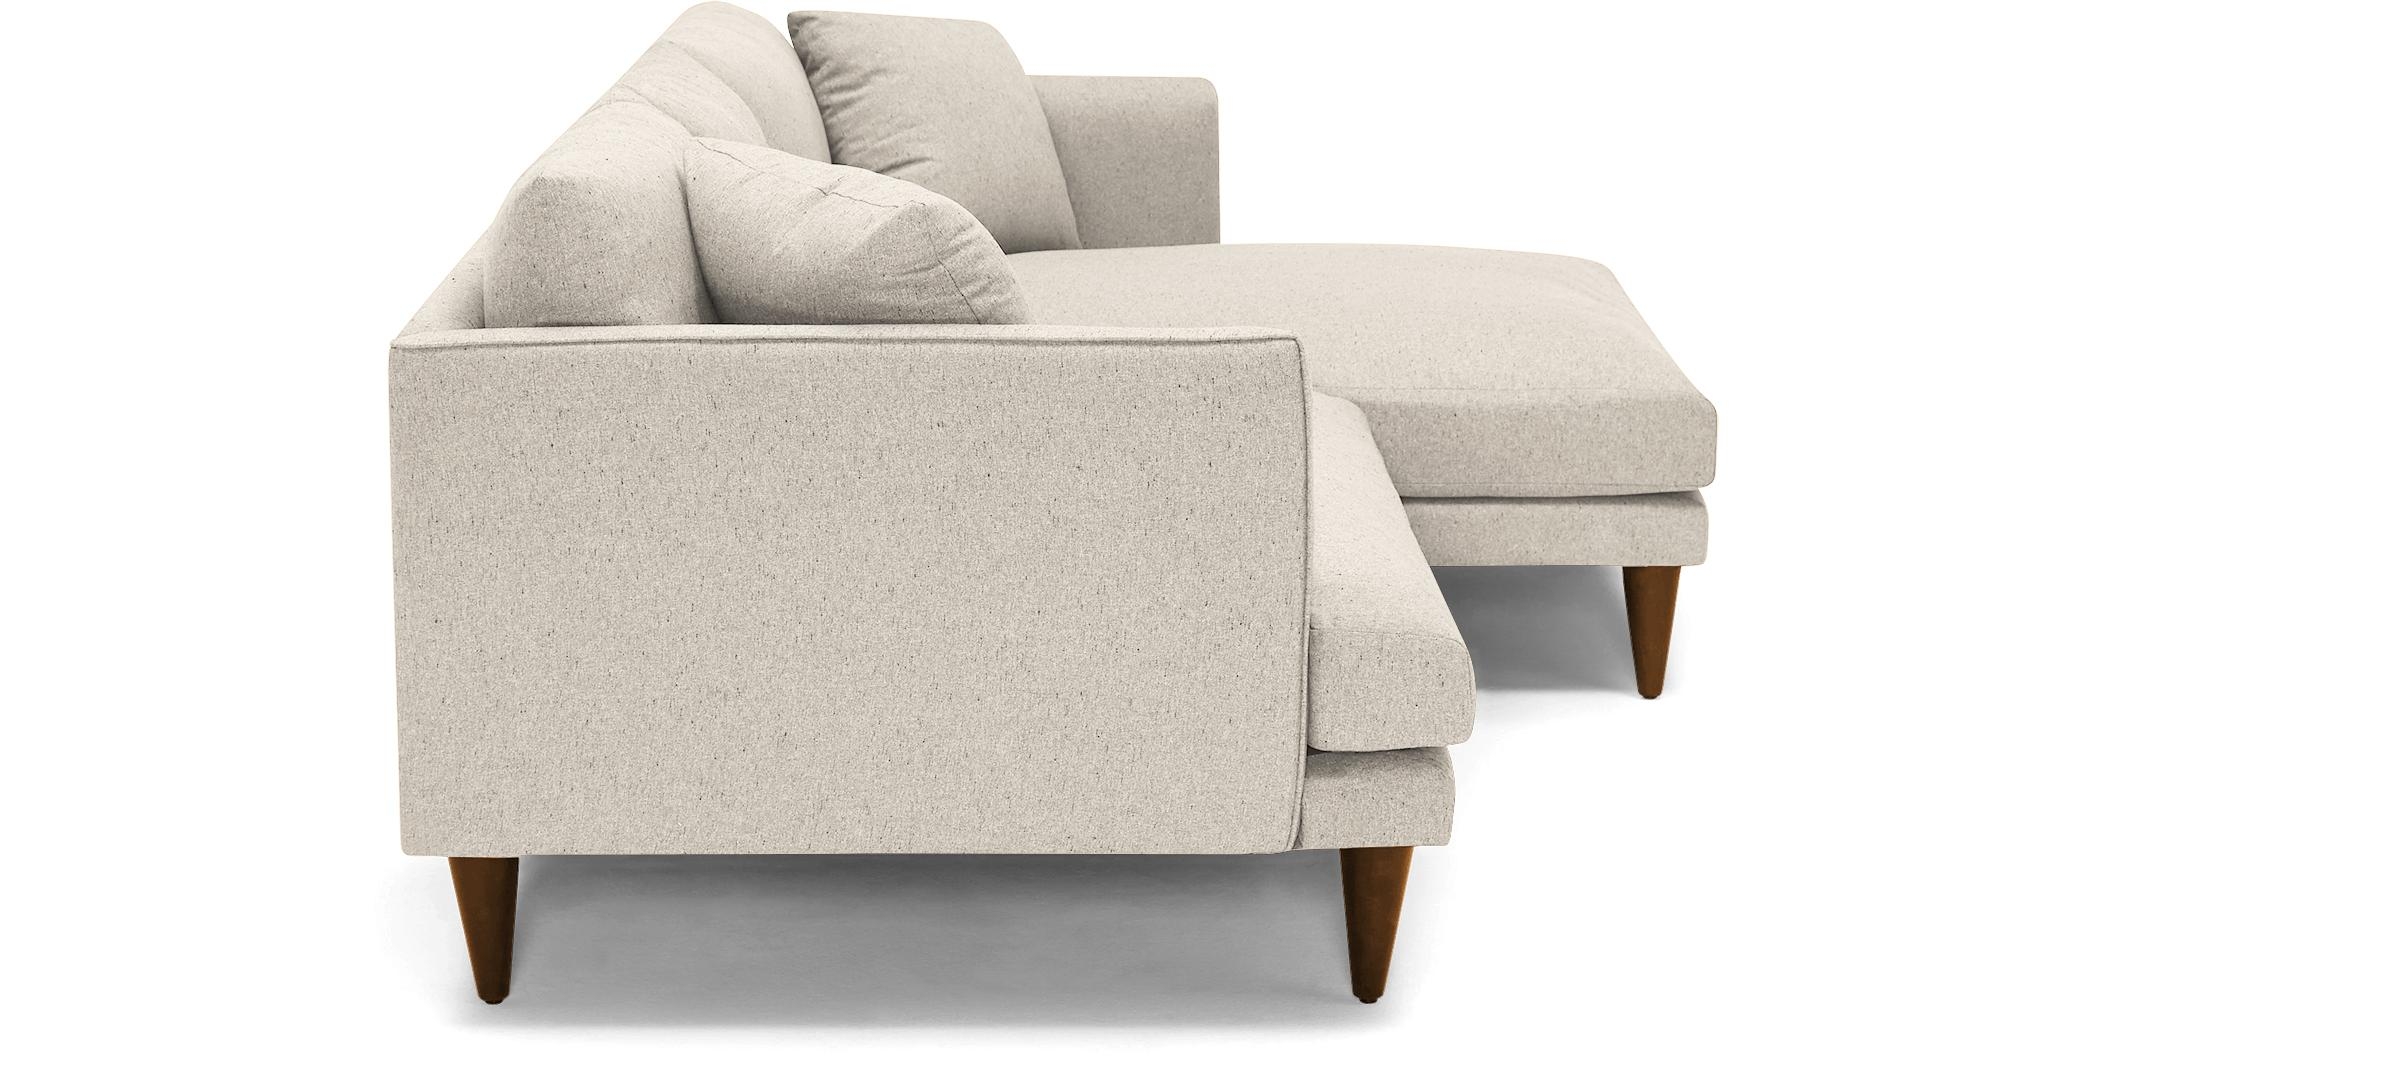 Beige/White Lewis Mid Century Modern Sectional - Cody Sandstone - Mocha - Right - Cone - Image 2